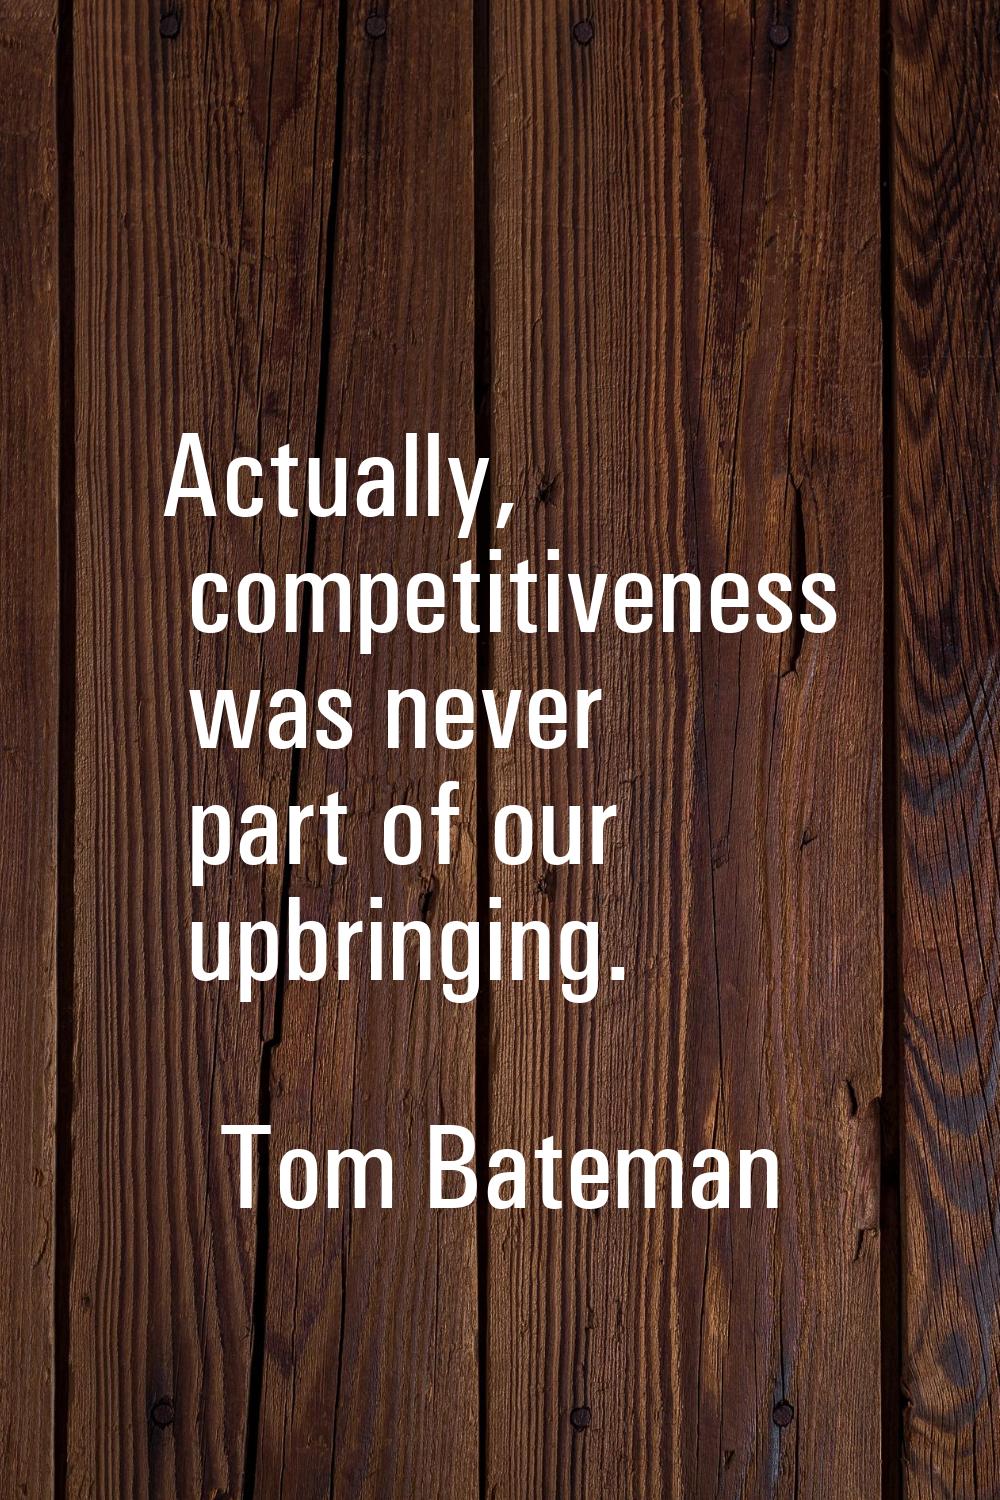 Actually, competitiveness was never part of our upbringing.